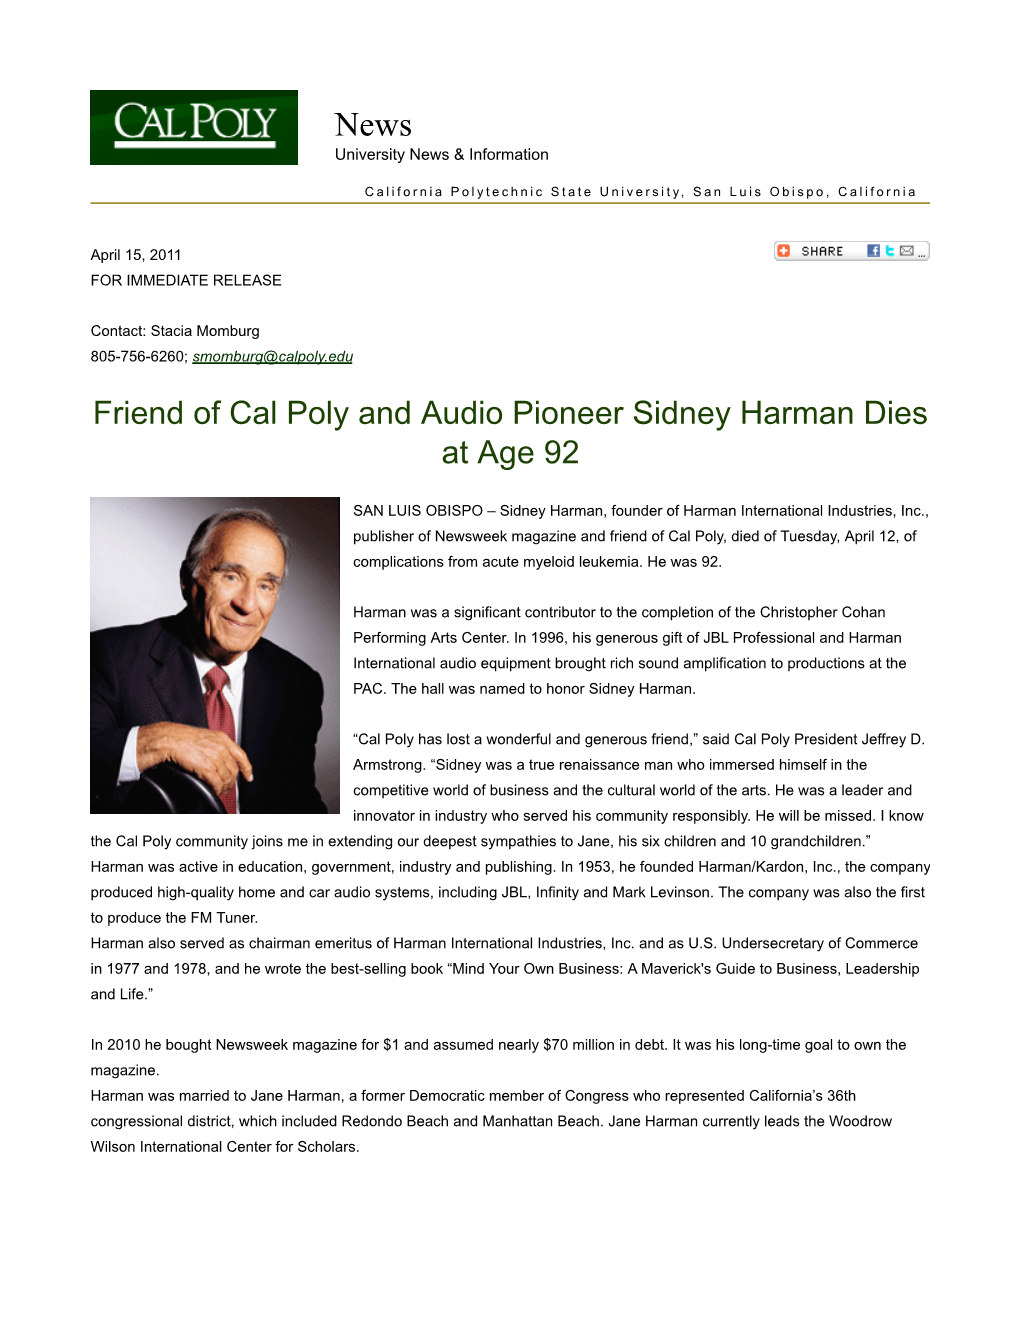 Friend of Cal Poly and Audio Pioneer Sidney Harman Dies at Age 92